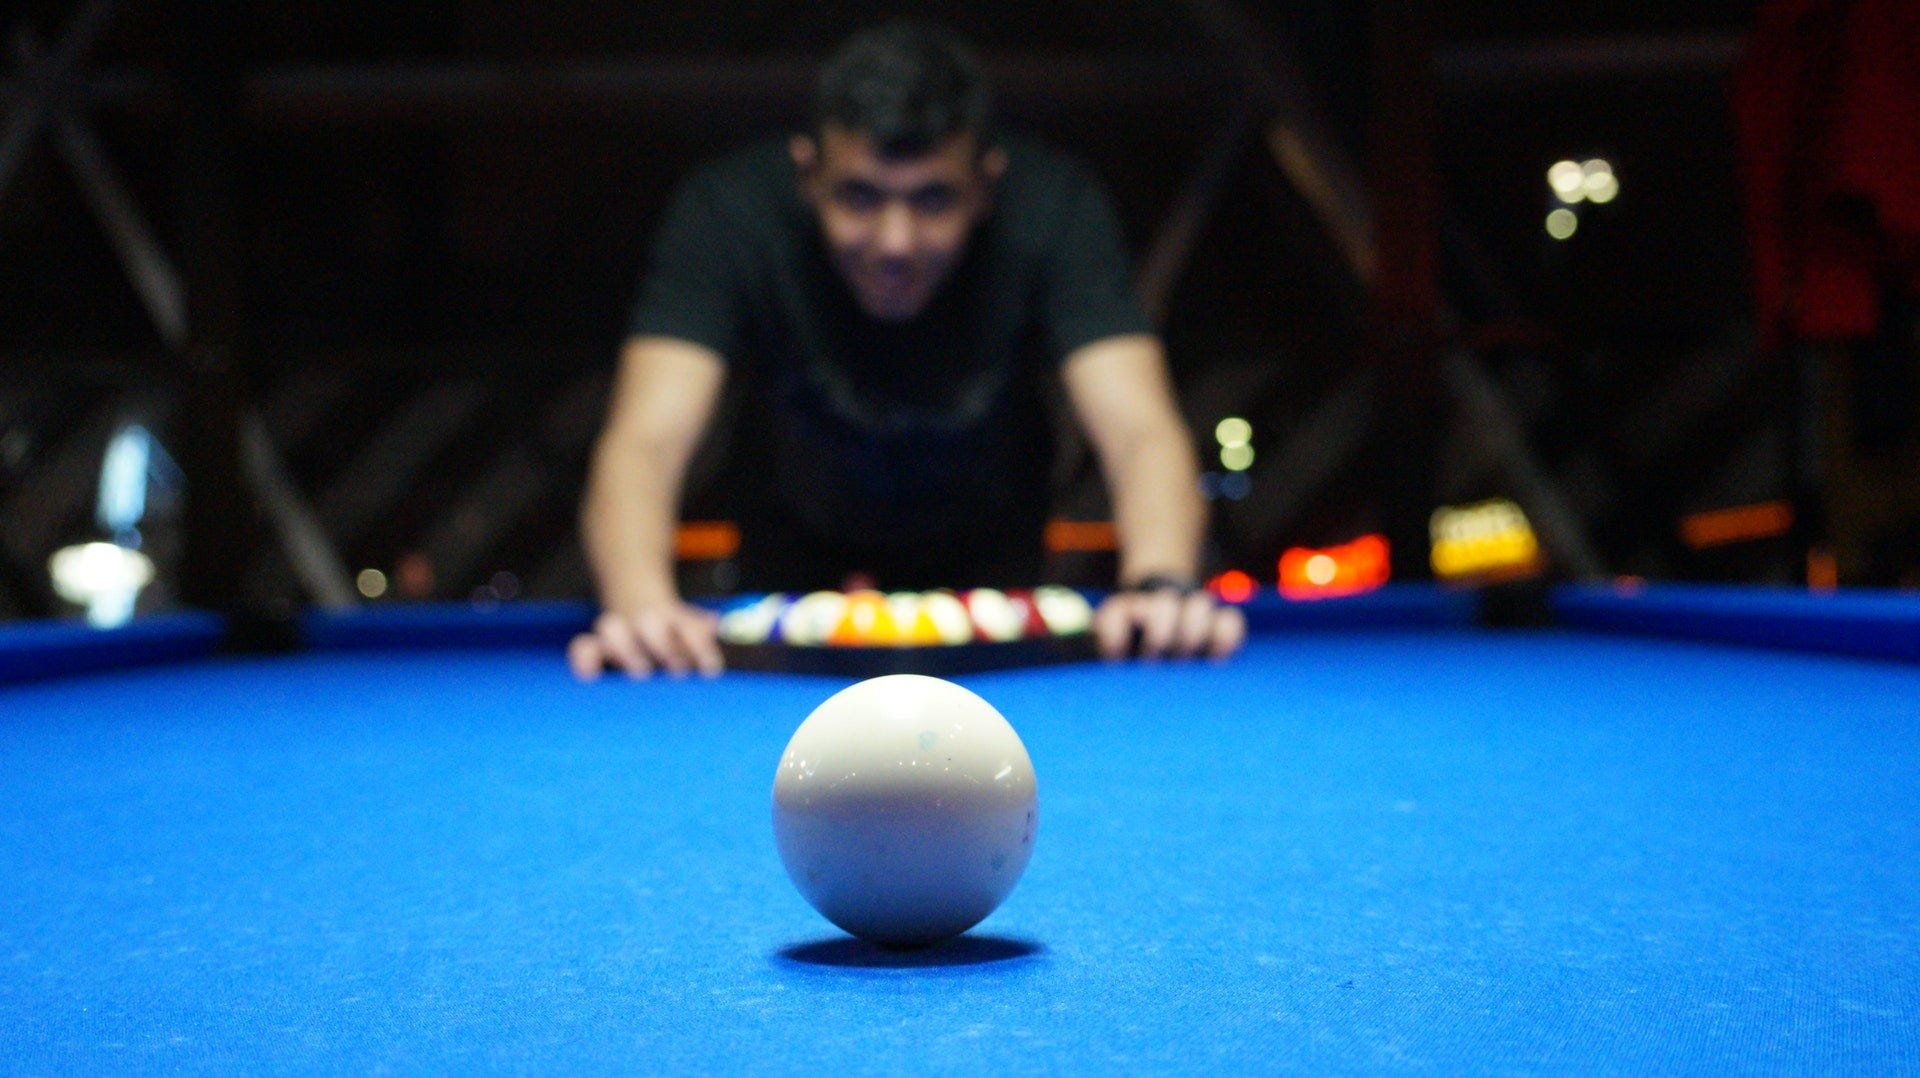 To Raise Your Game You Must Think Like a Hustler and See All the Angles—In  Pool, In Life | by Robert Greene | Mission.org | Medium